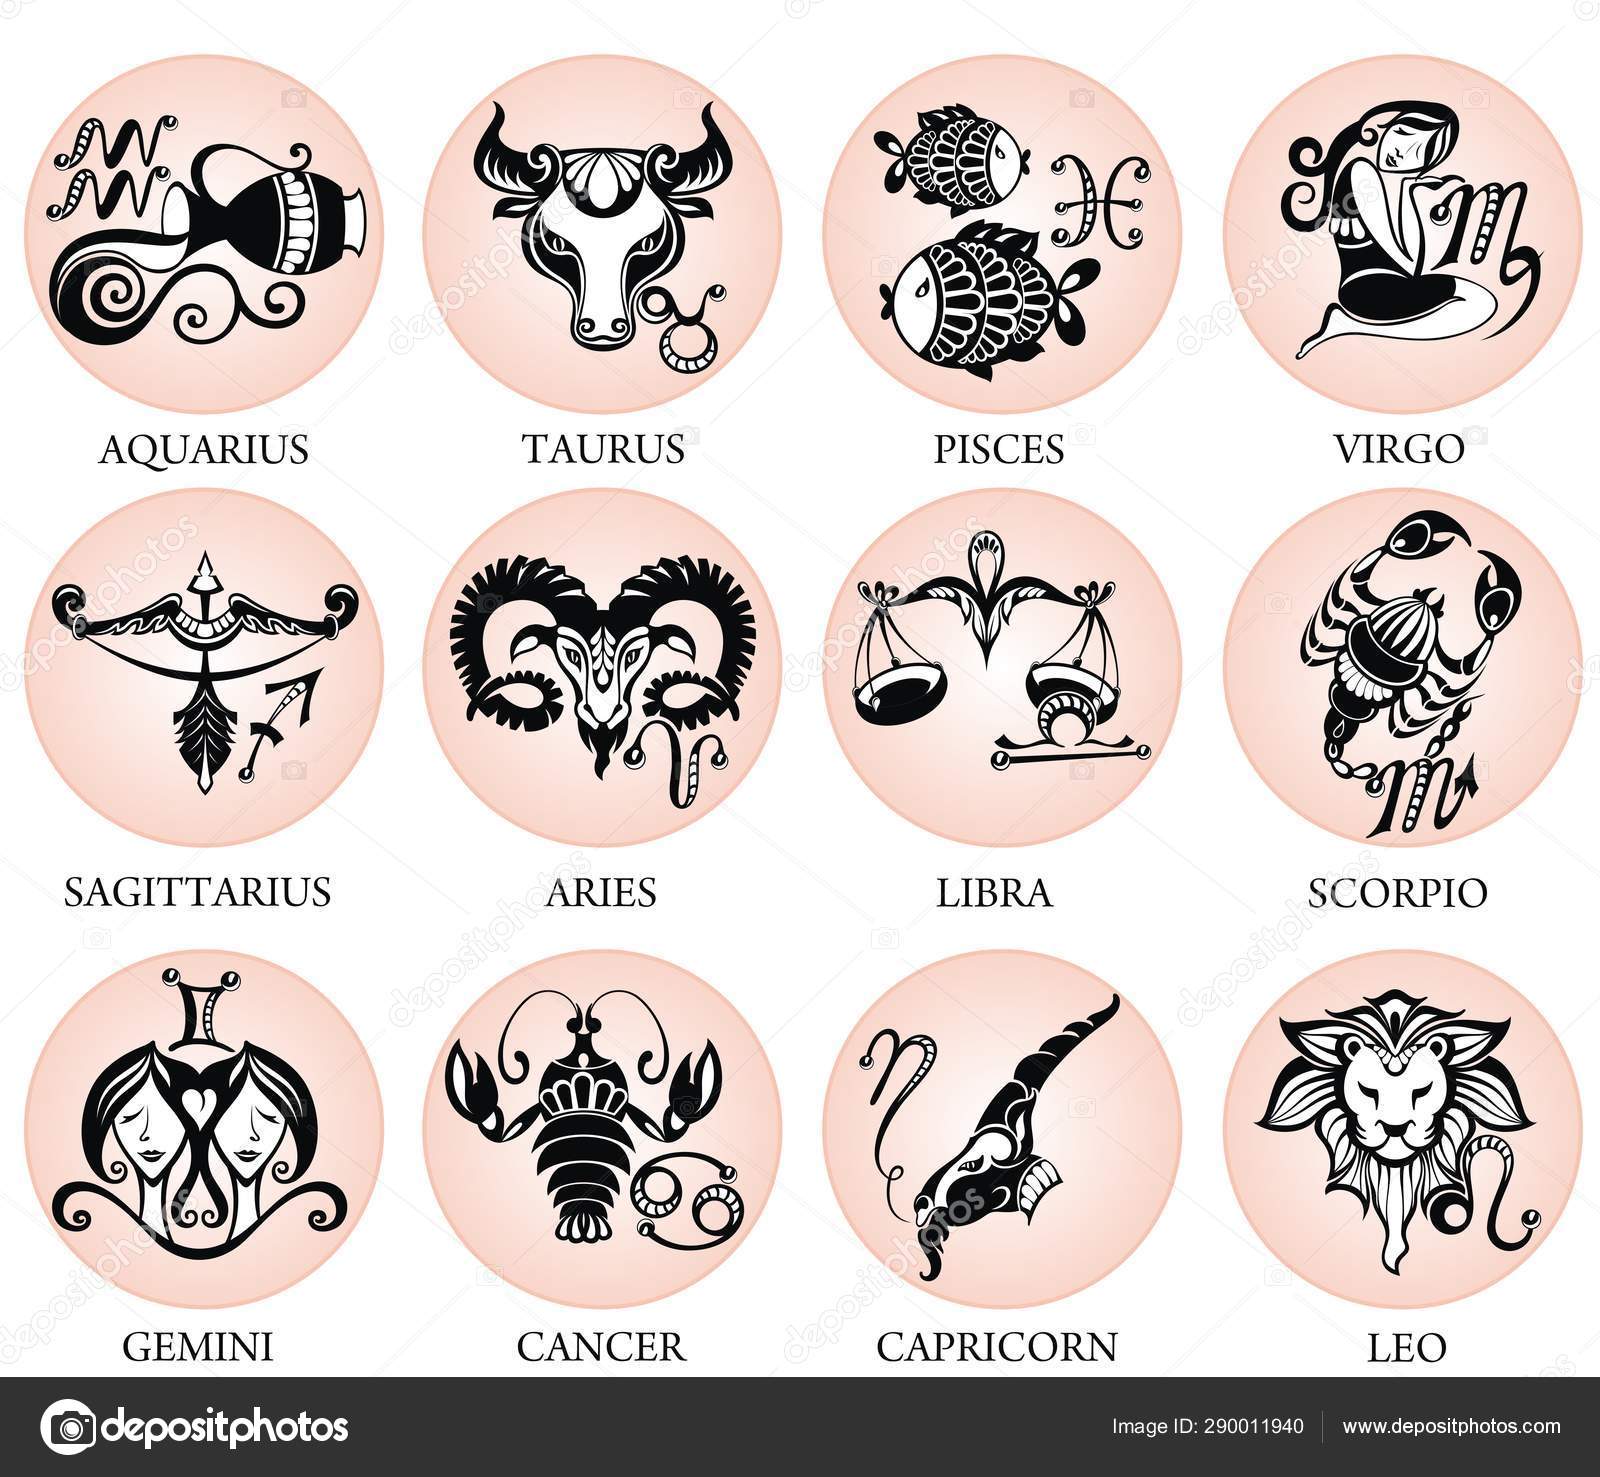 What are the different symbols for astrology?